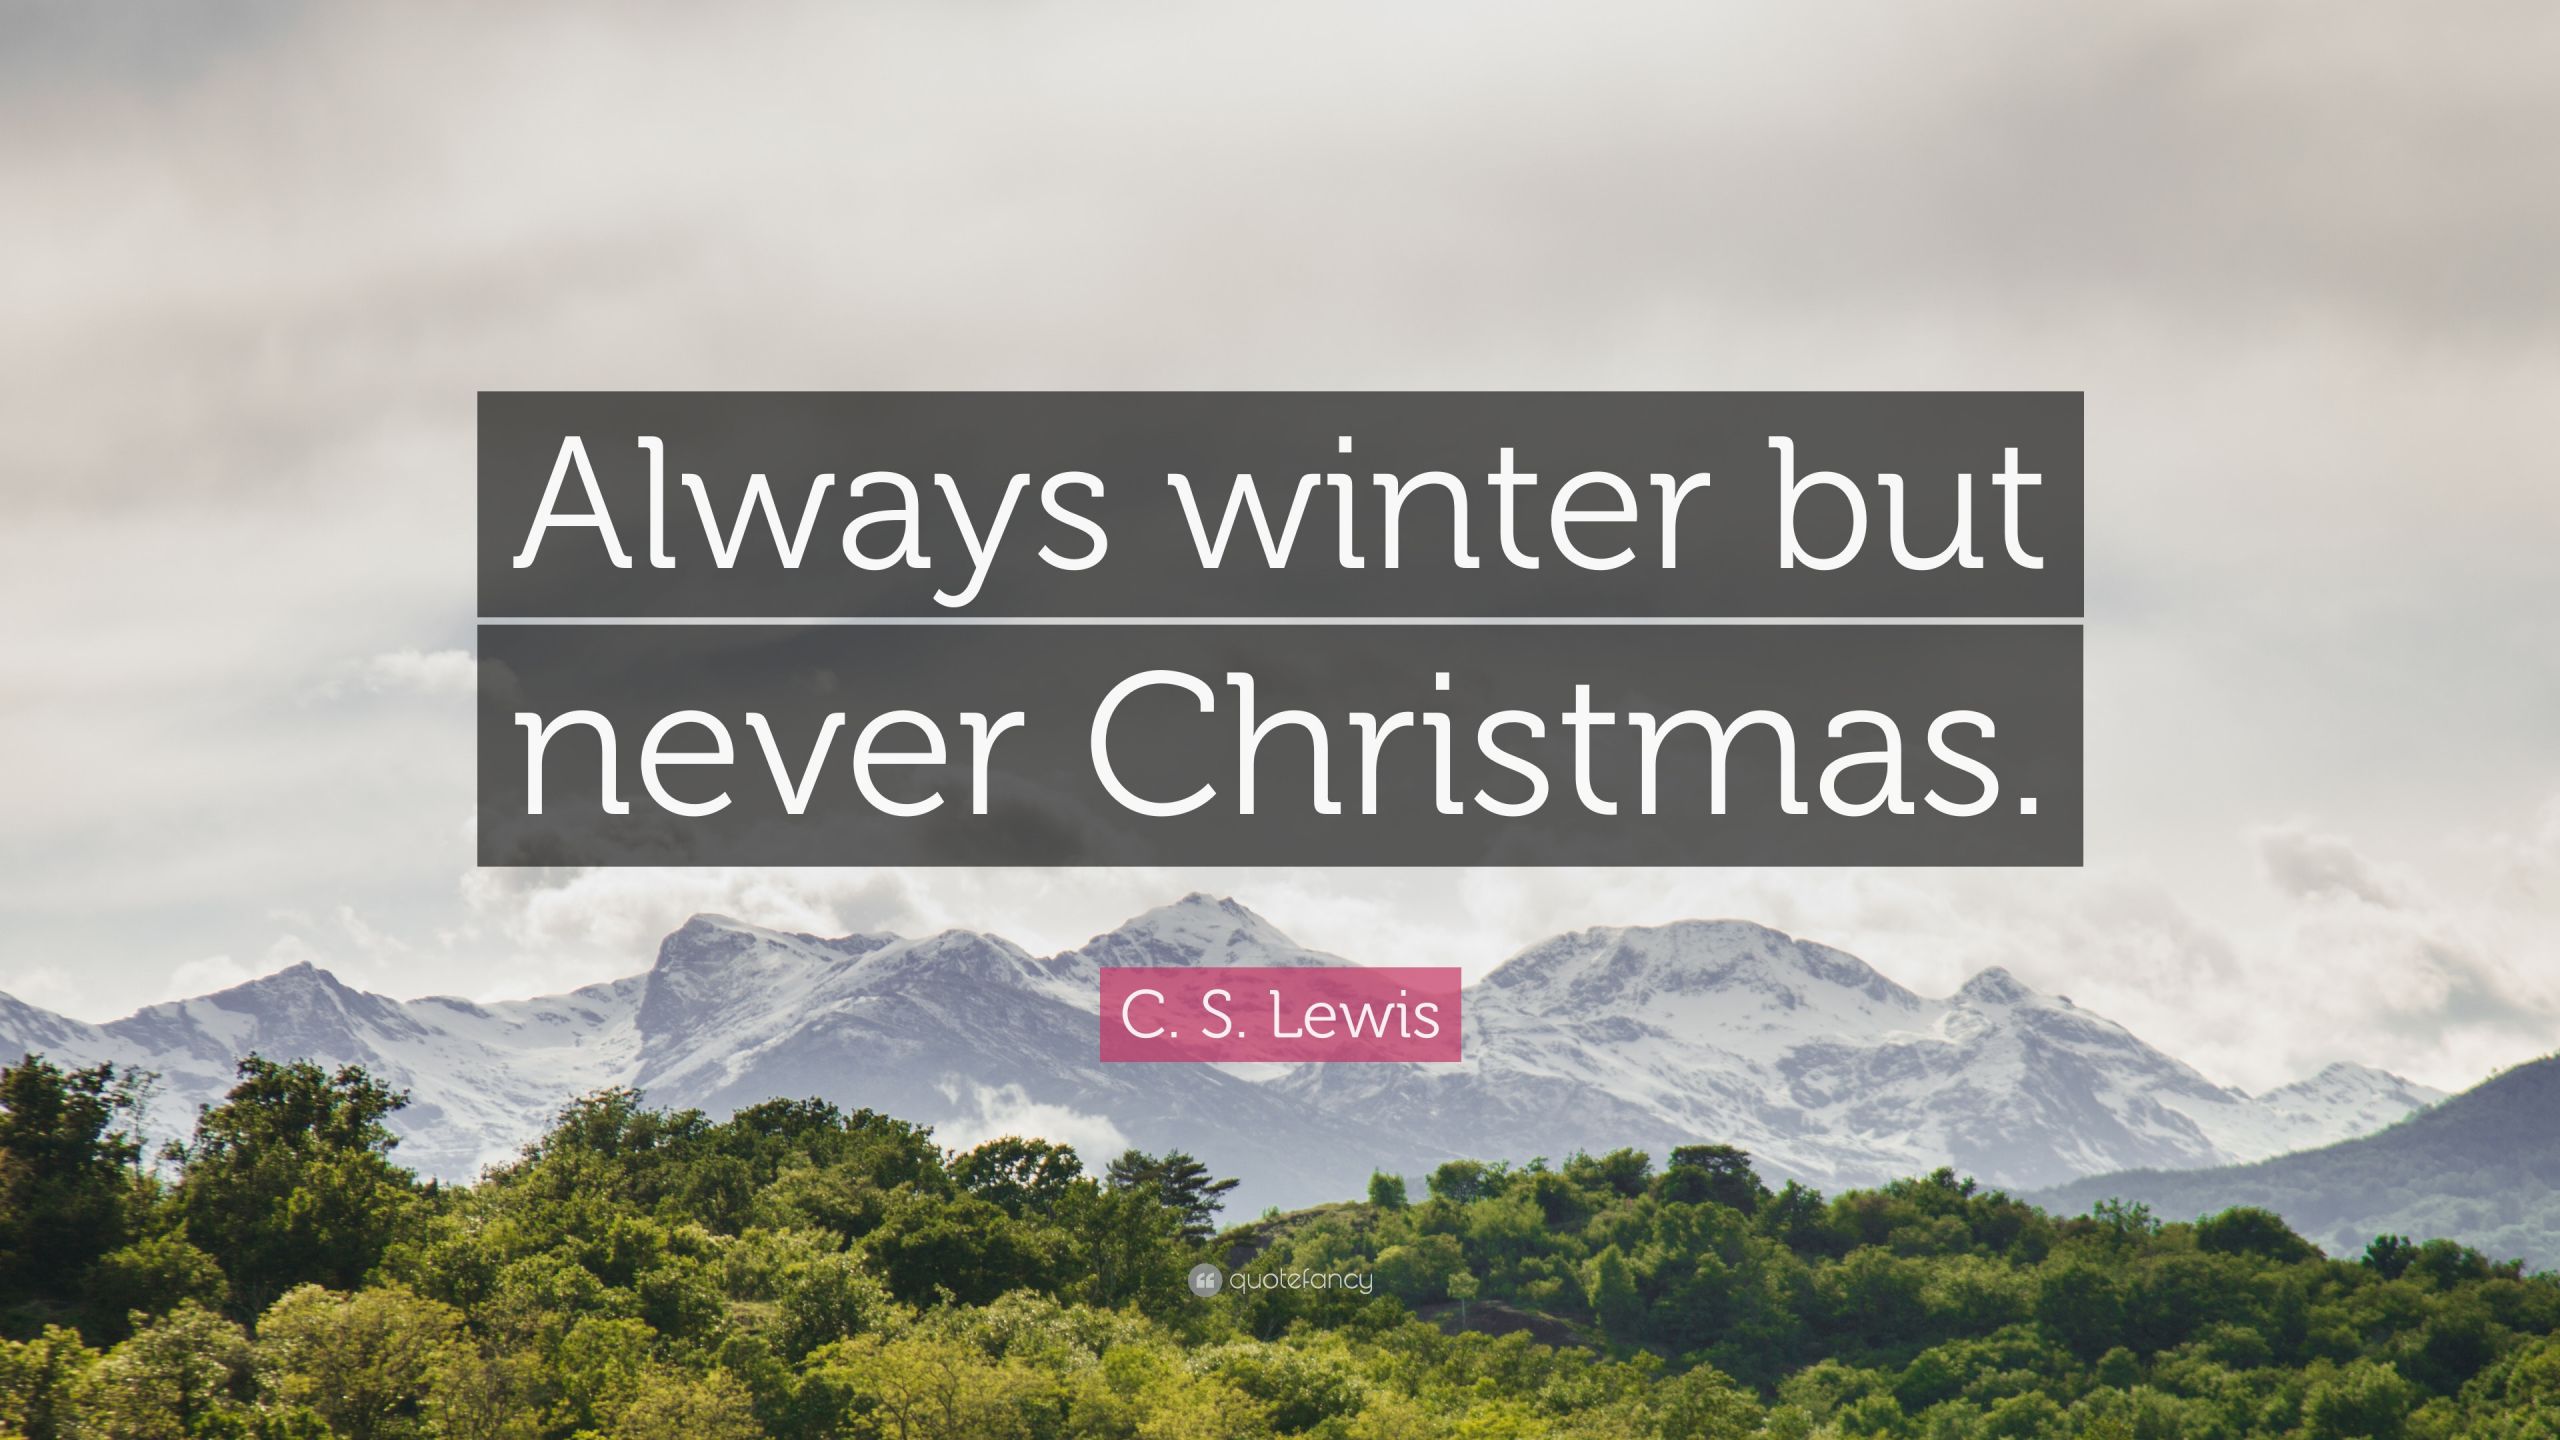 C.S Lewis Christmas Quotes
 C S Lewis Quotes 100 wallpapers Quotefancy